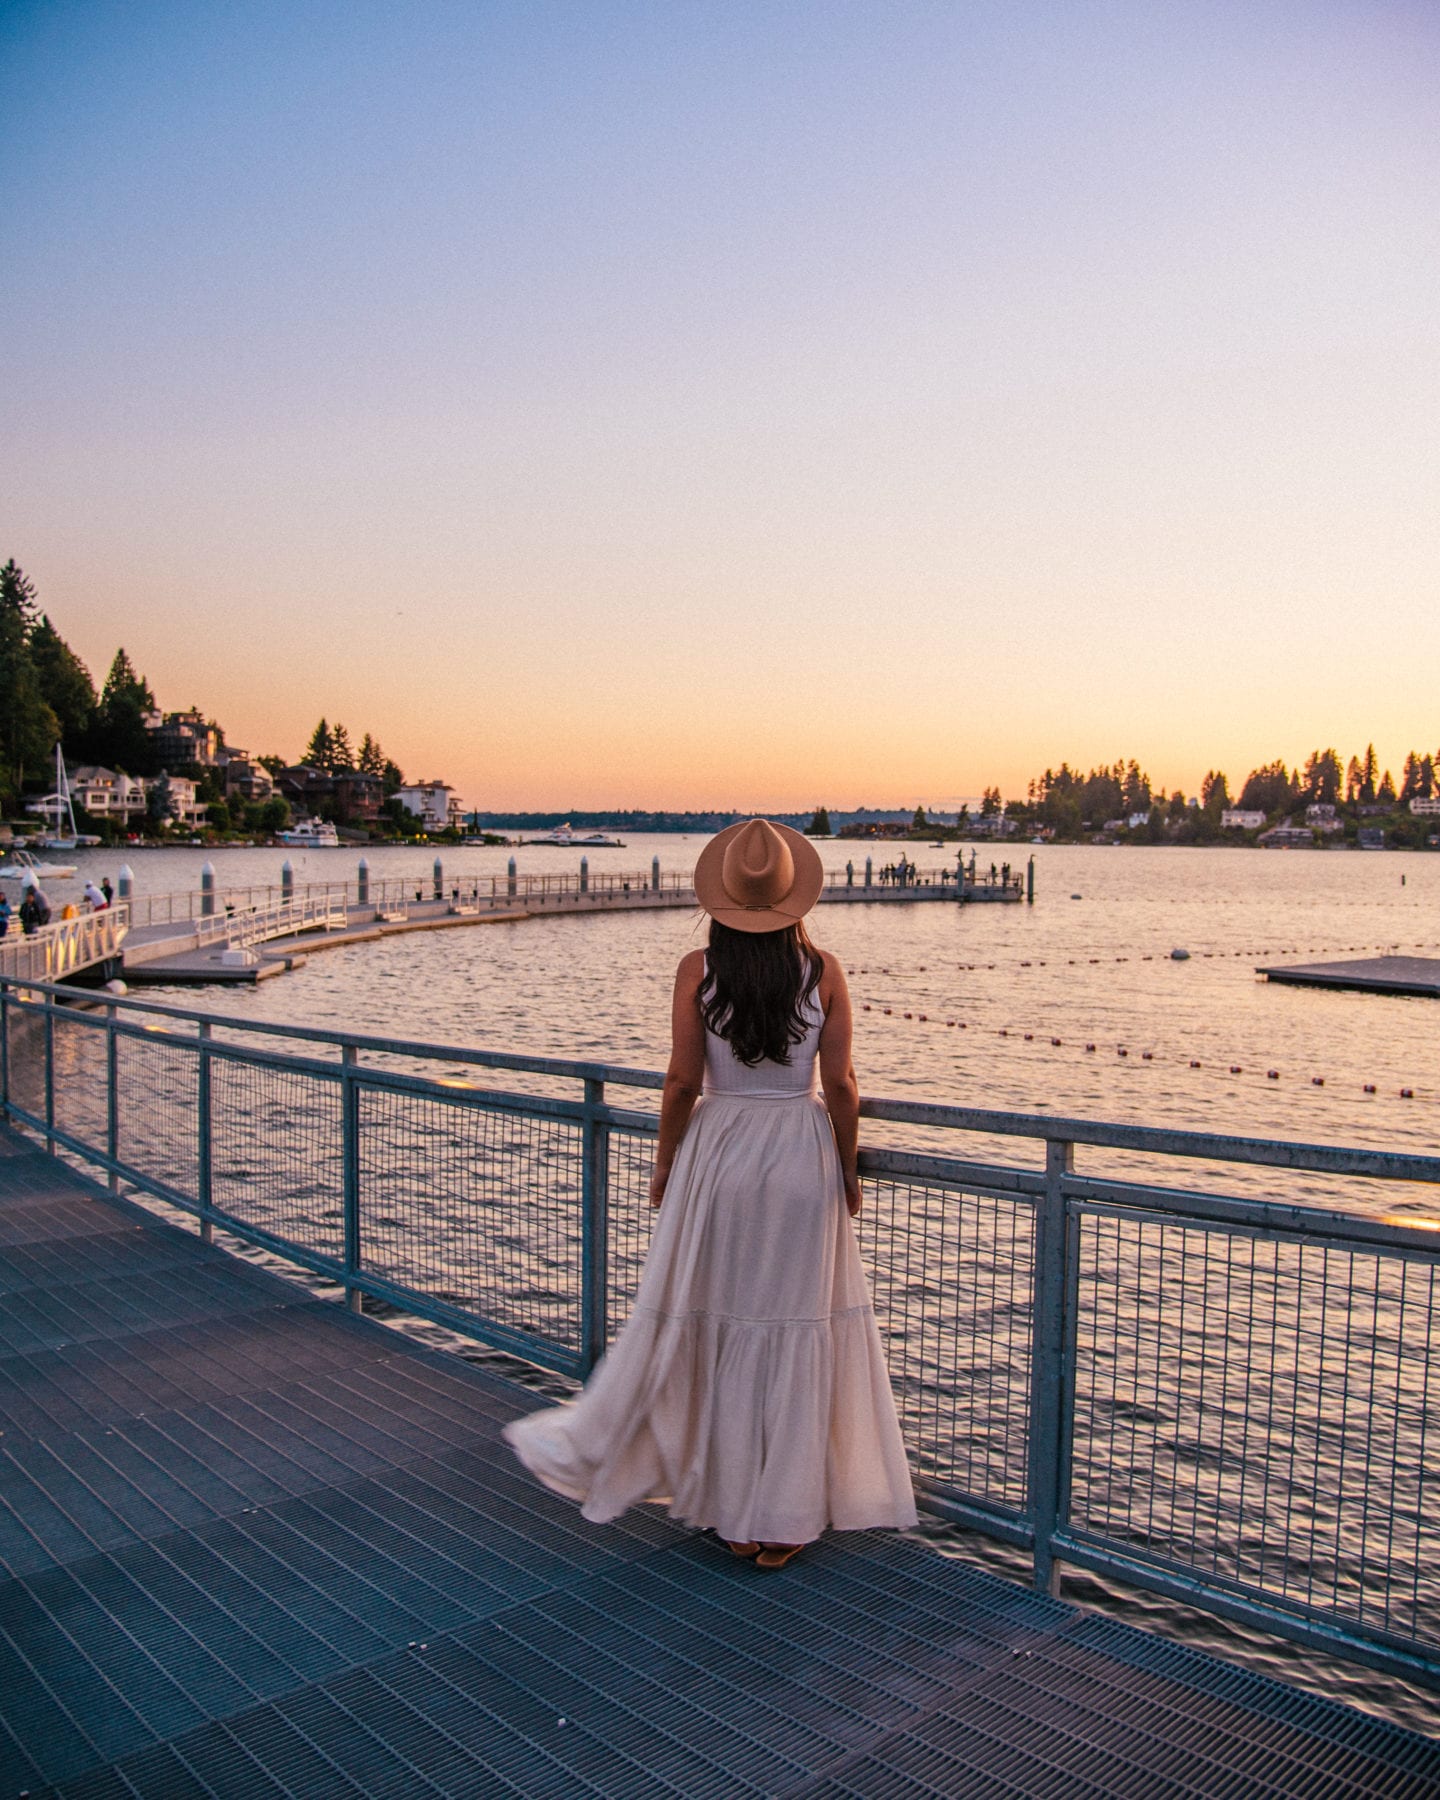 27 Incredible Things To Do In Bellevue Wa In 2020 With Map And Photos